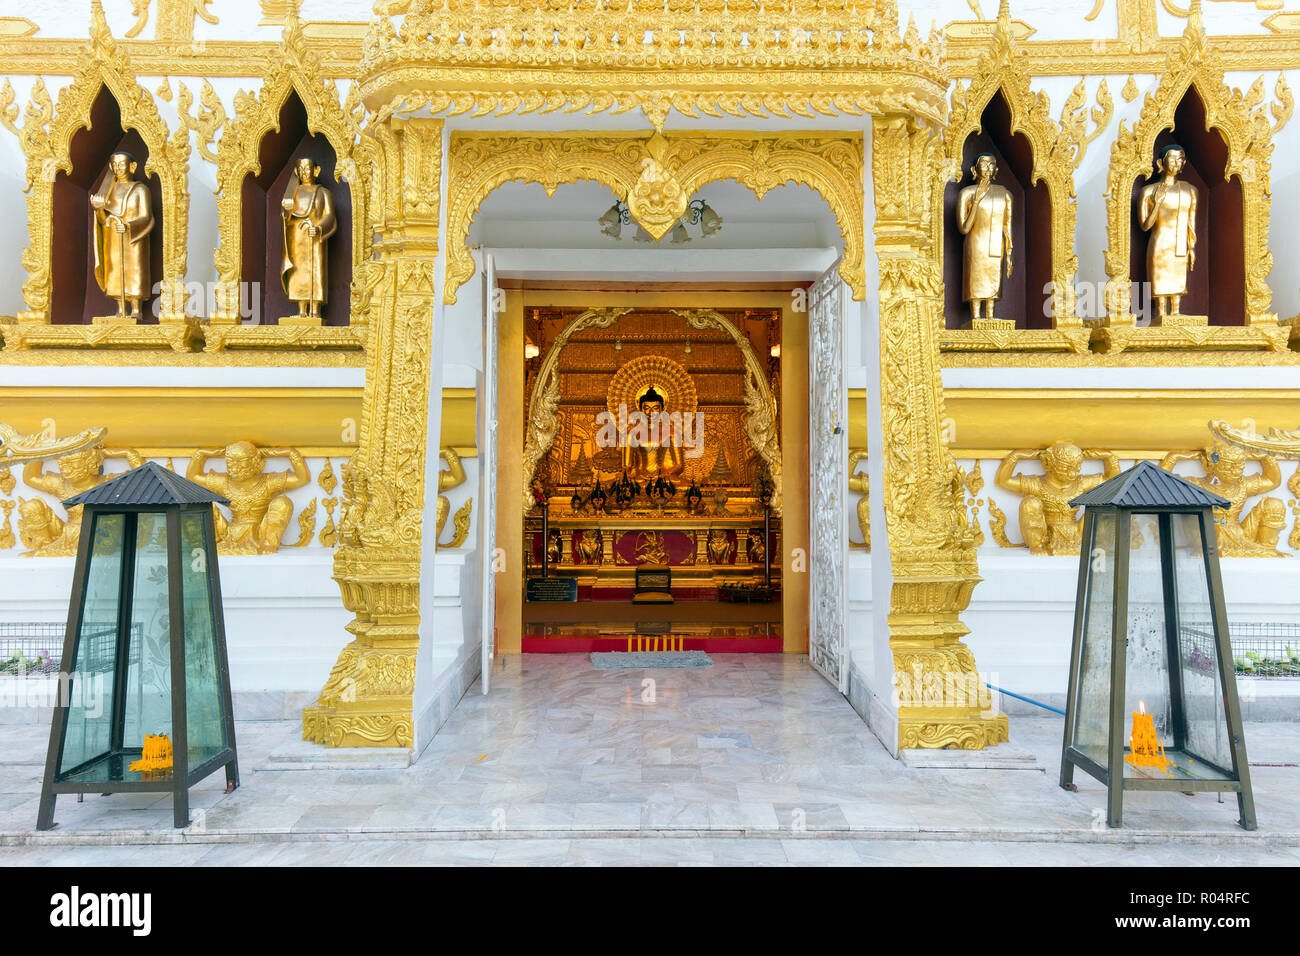 Entrance of the Wat Phrathat Nong Bua temple in Ubon Ratchathani, Thailand Stock Photo